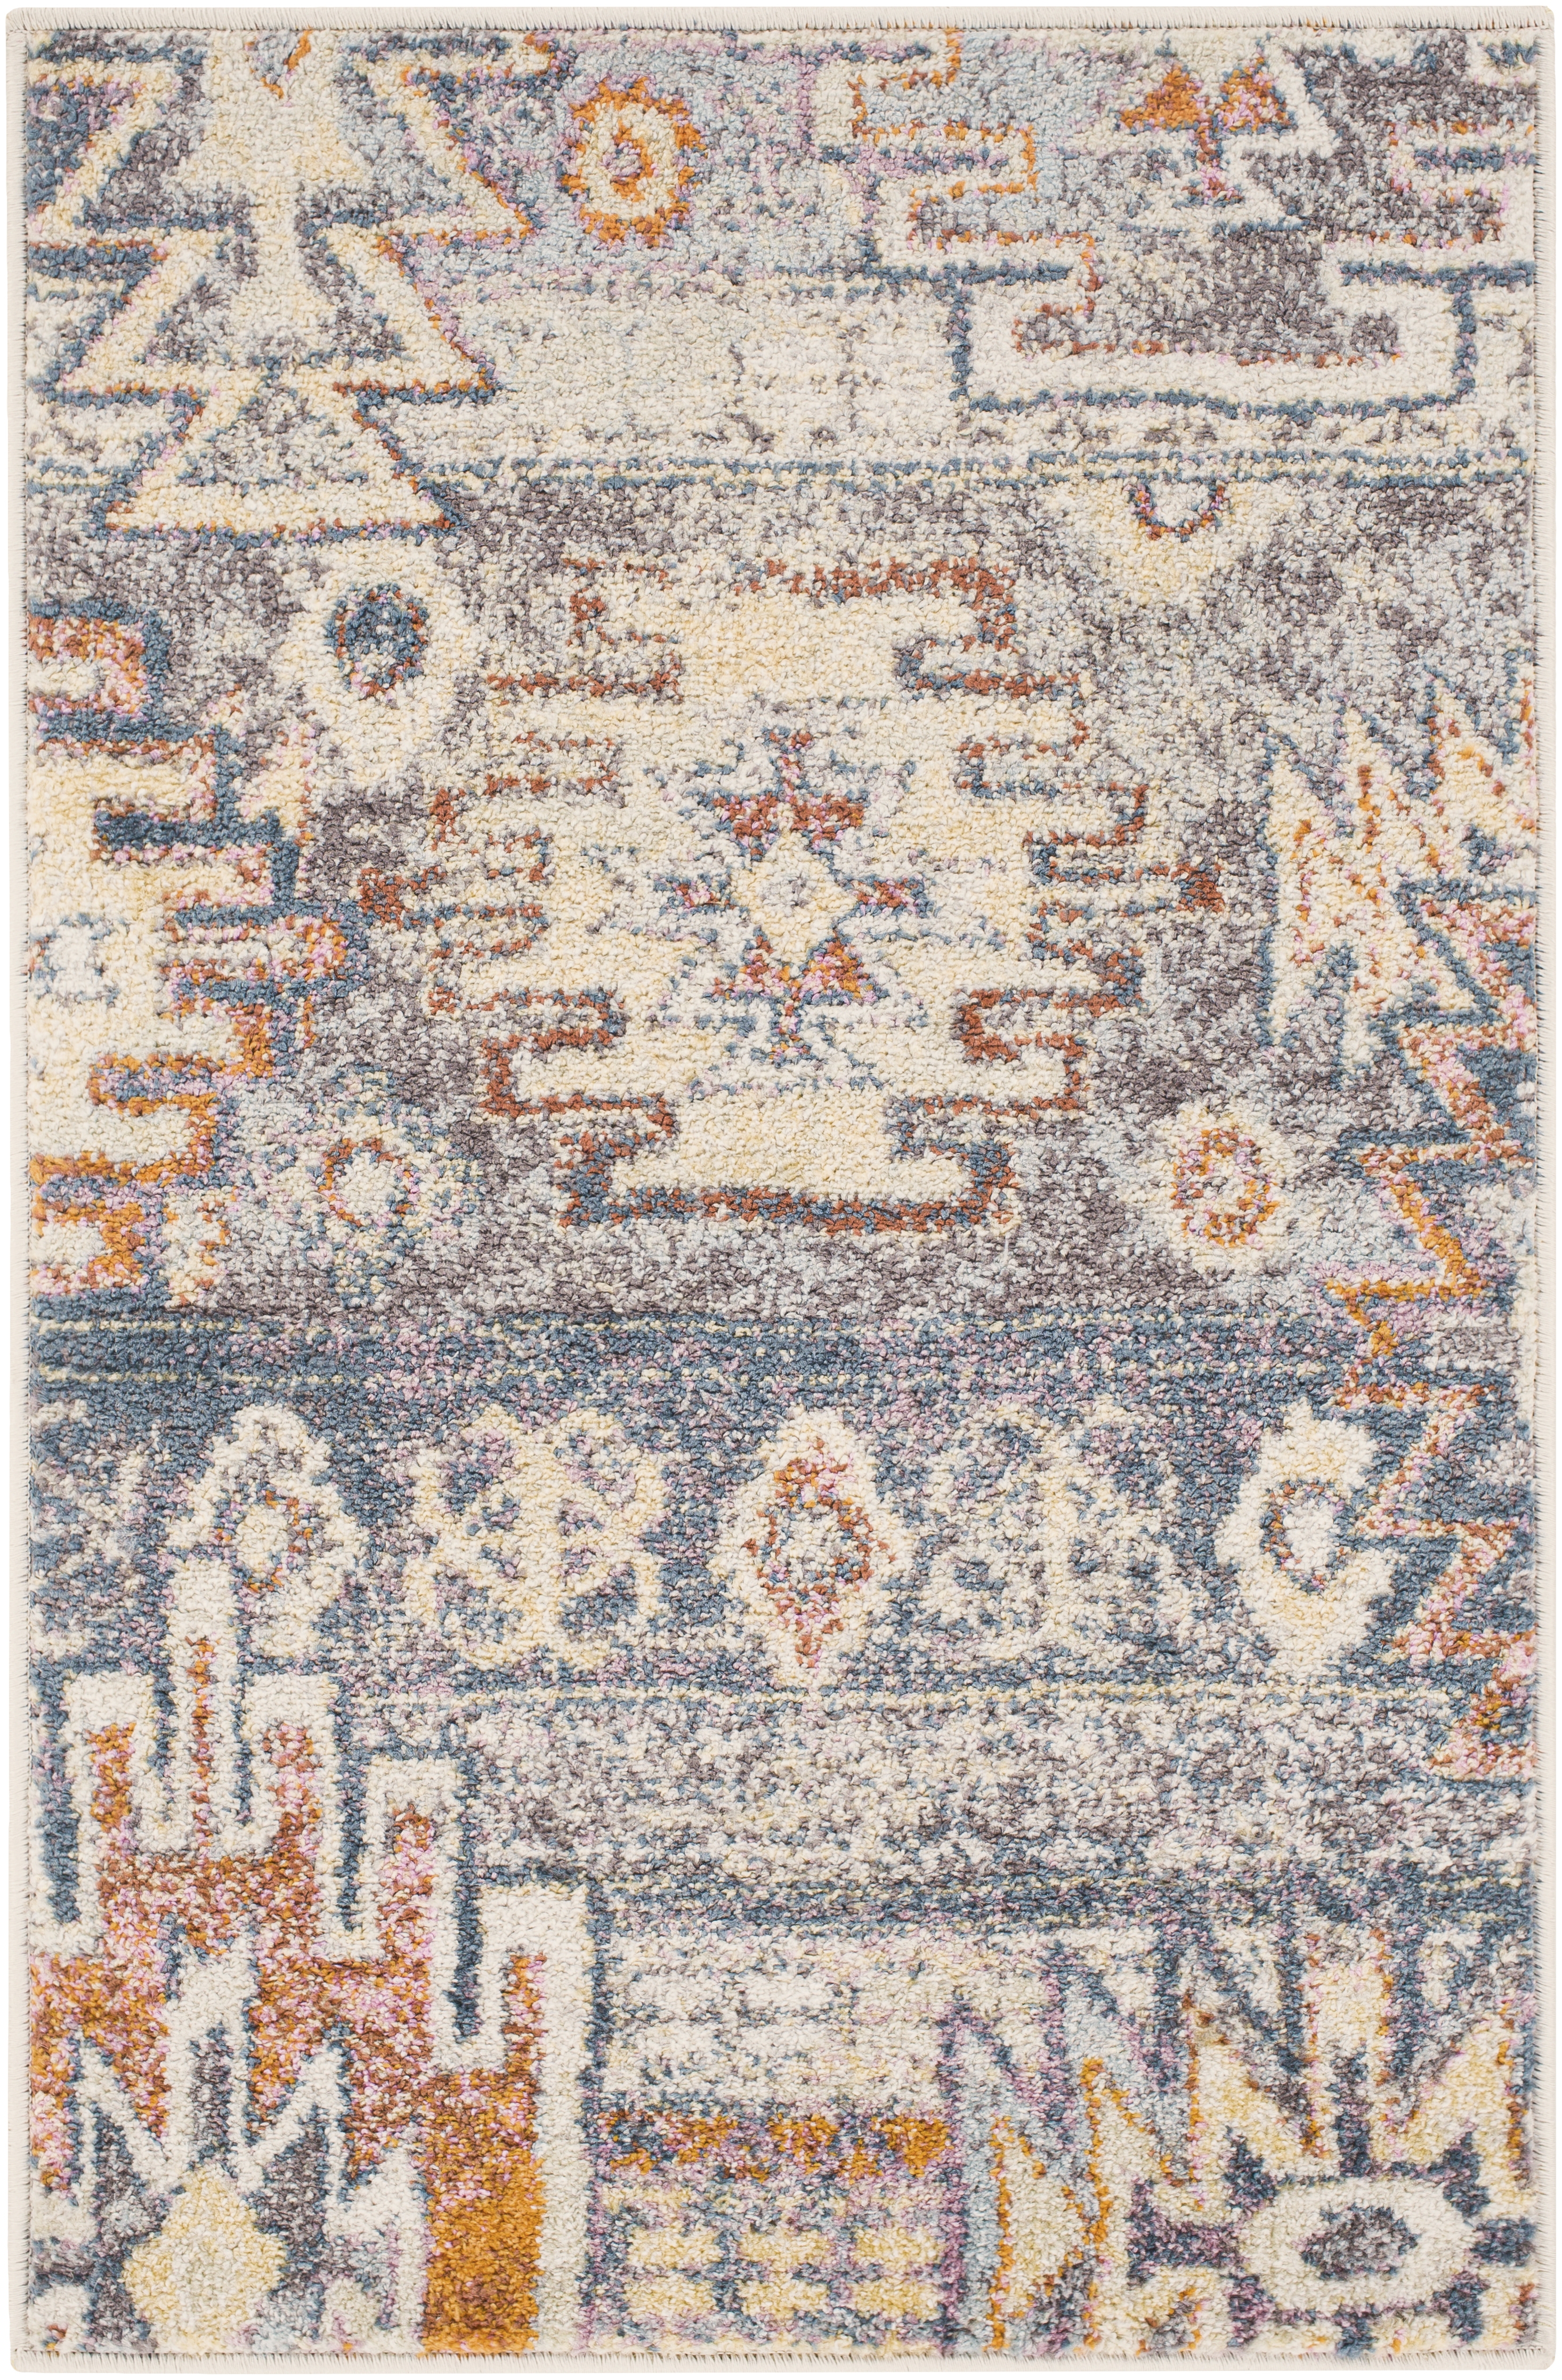 New Mexico Rug, 2' x 2'11" - Image 0